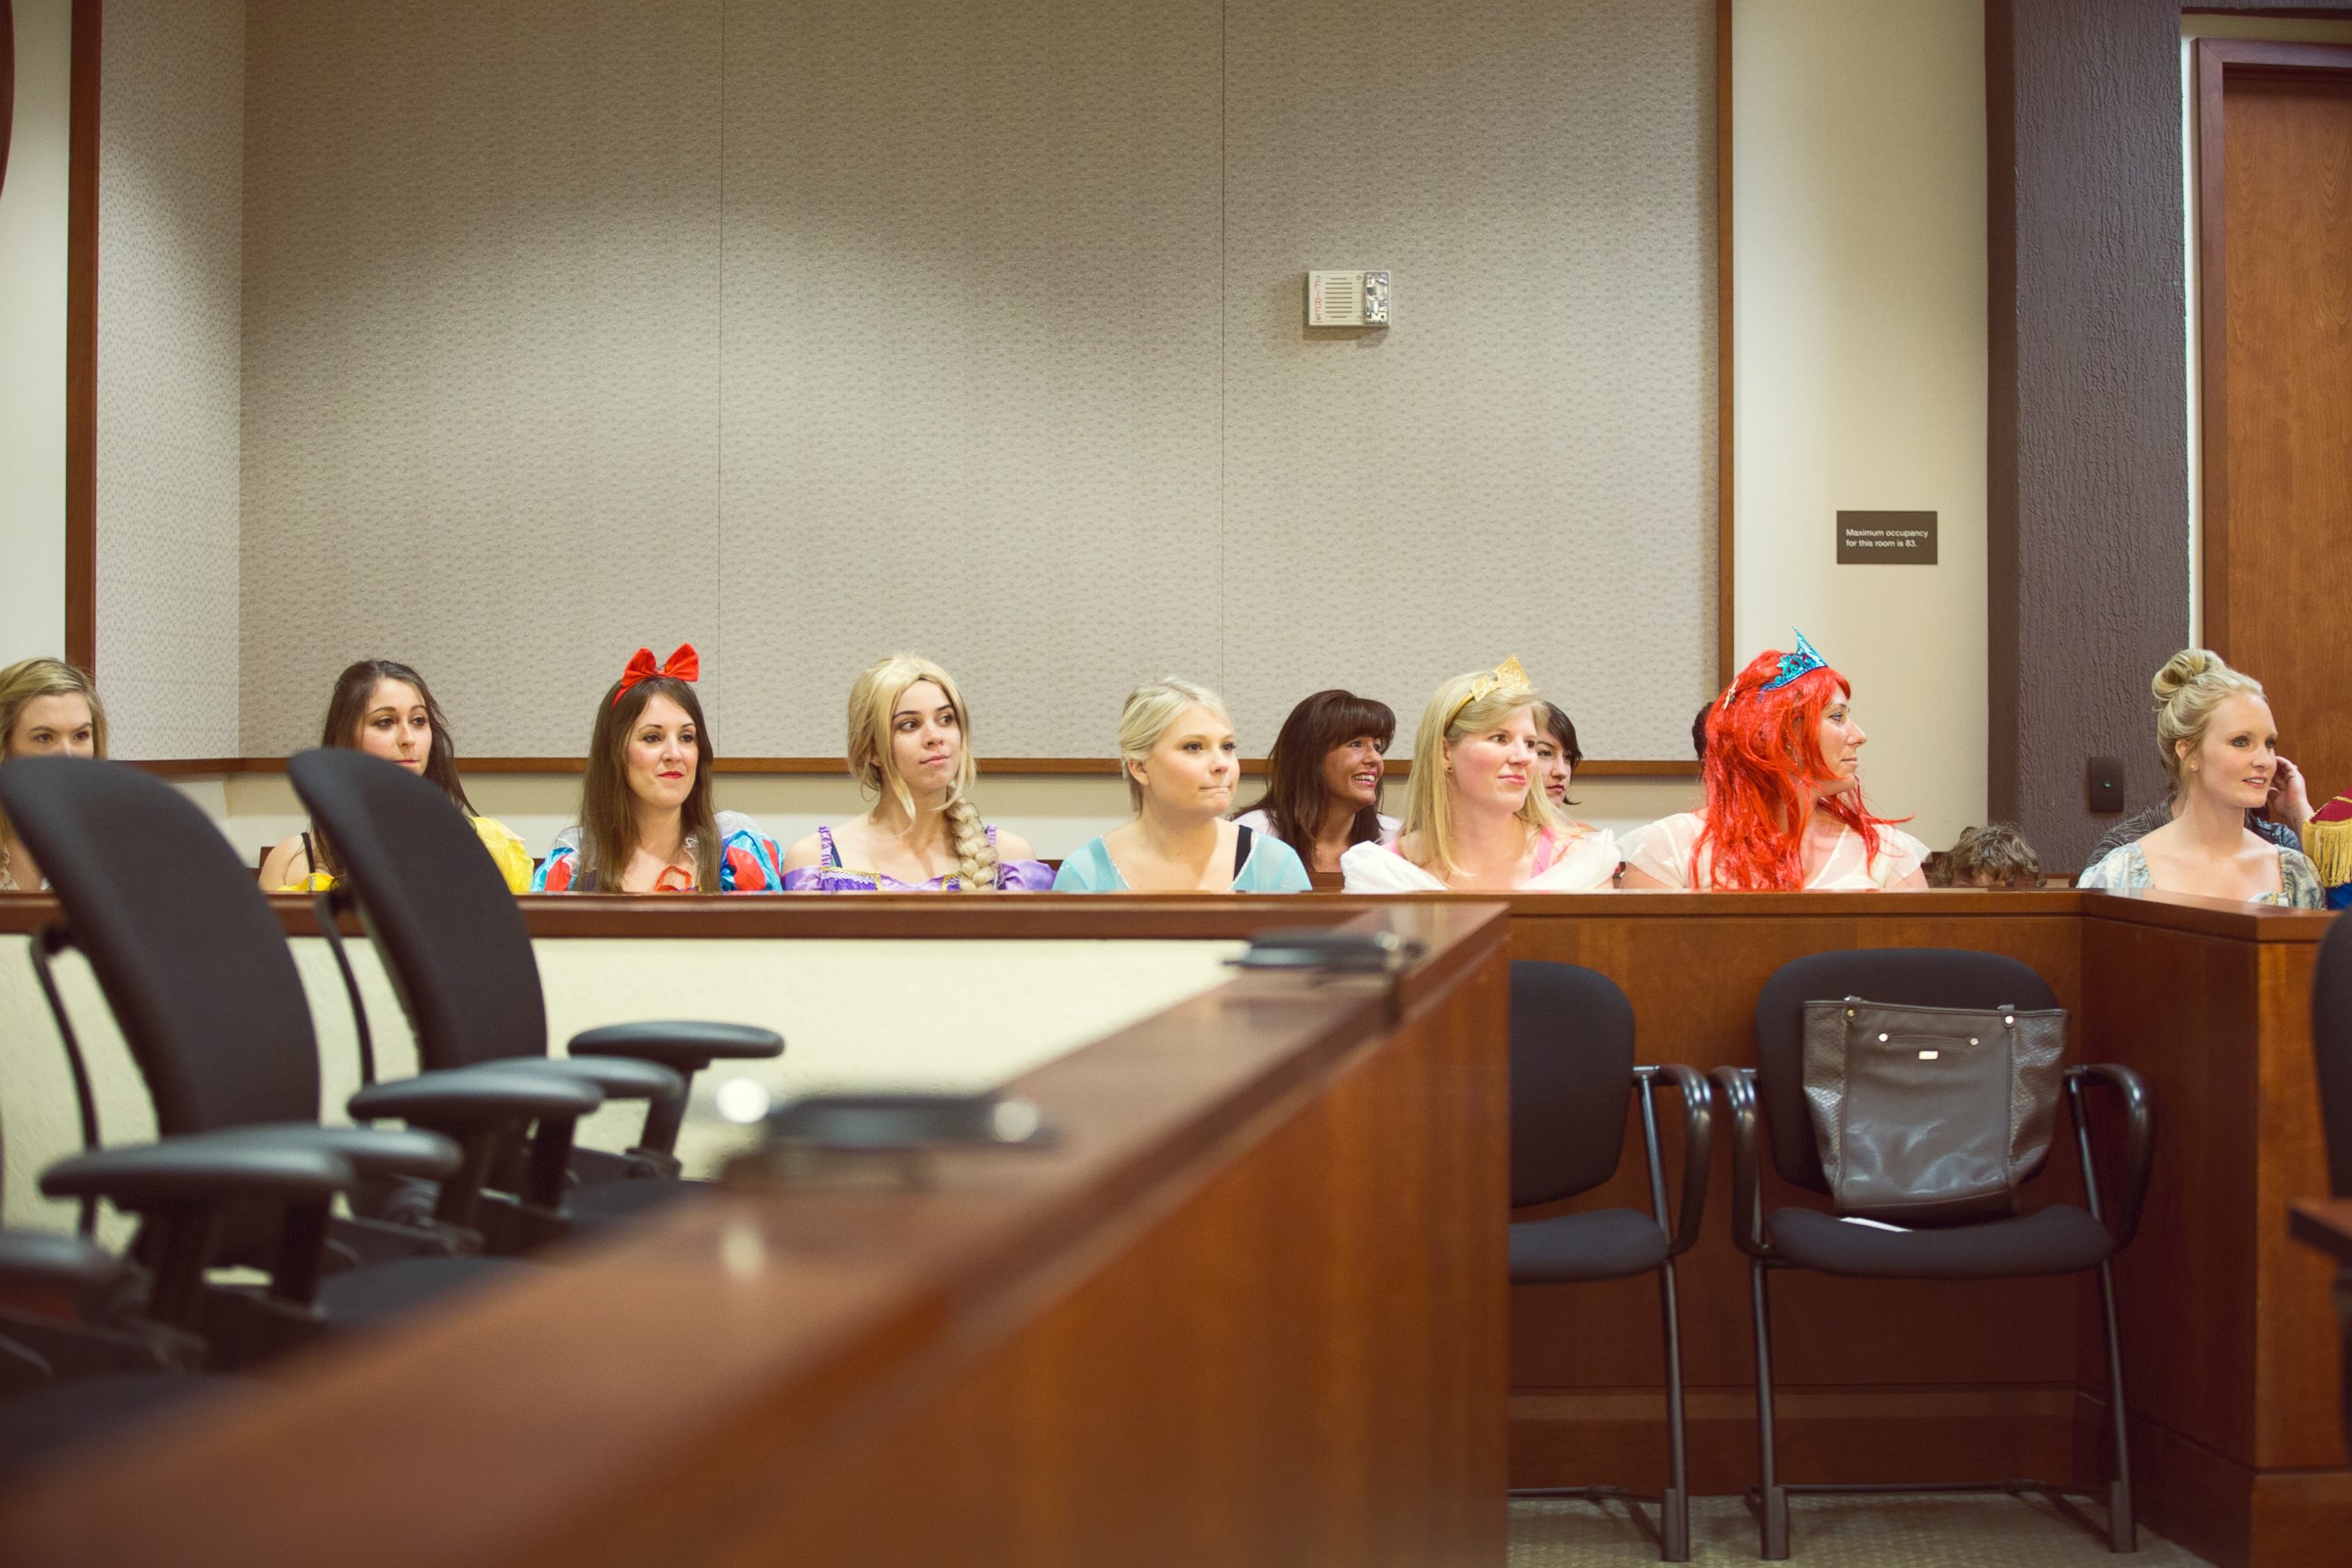 PHOTO: Girl's Adoption Gets Magical Touch With Disney Princesses